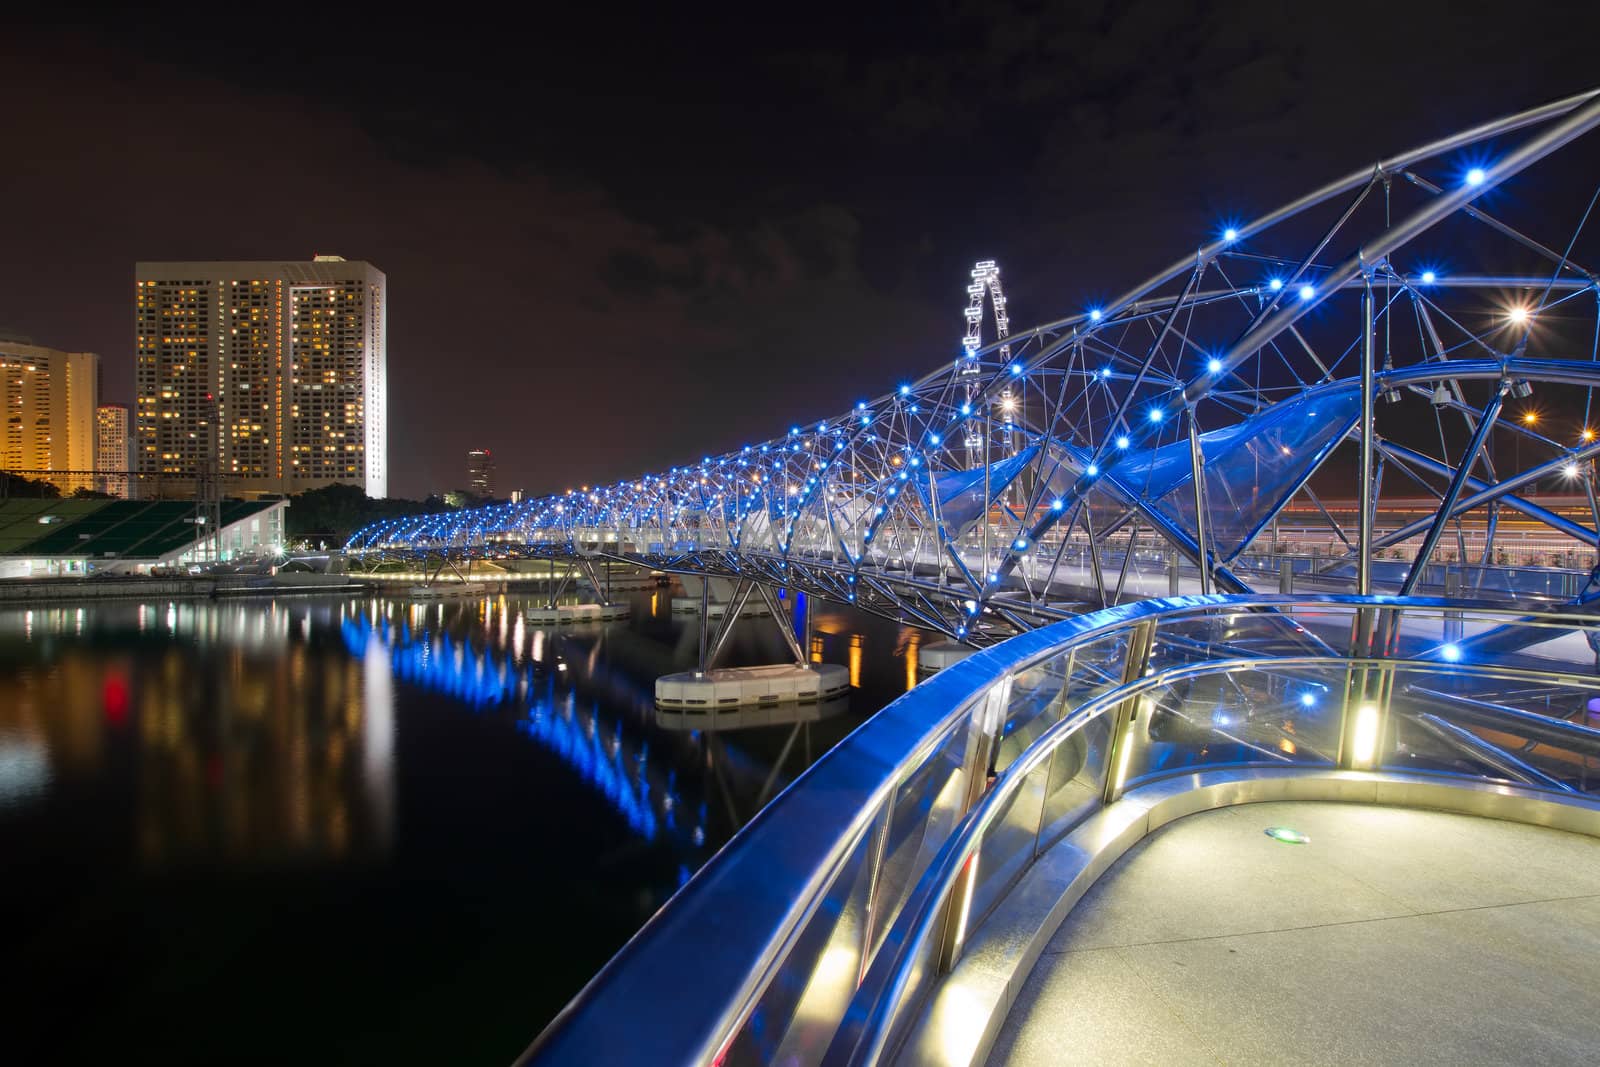 Double Helix Bridge in Singapore at Night by jpldesigns